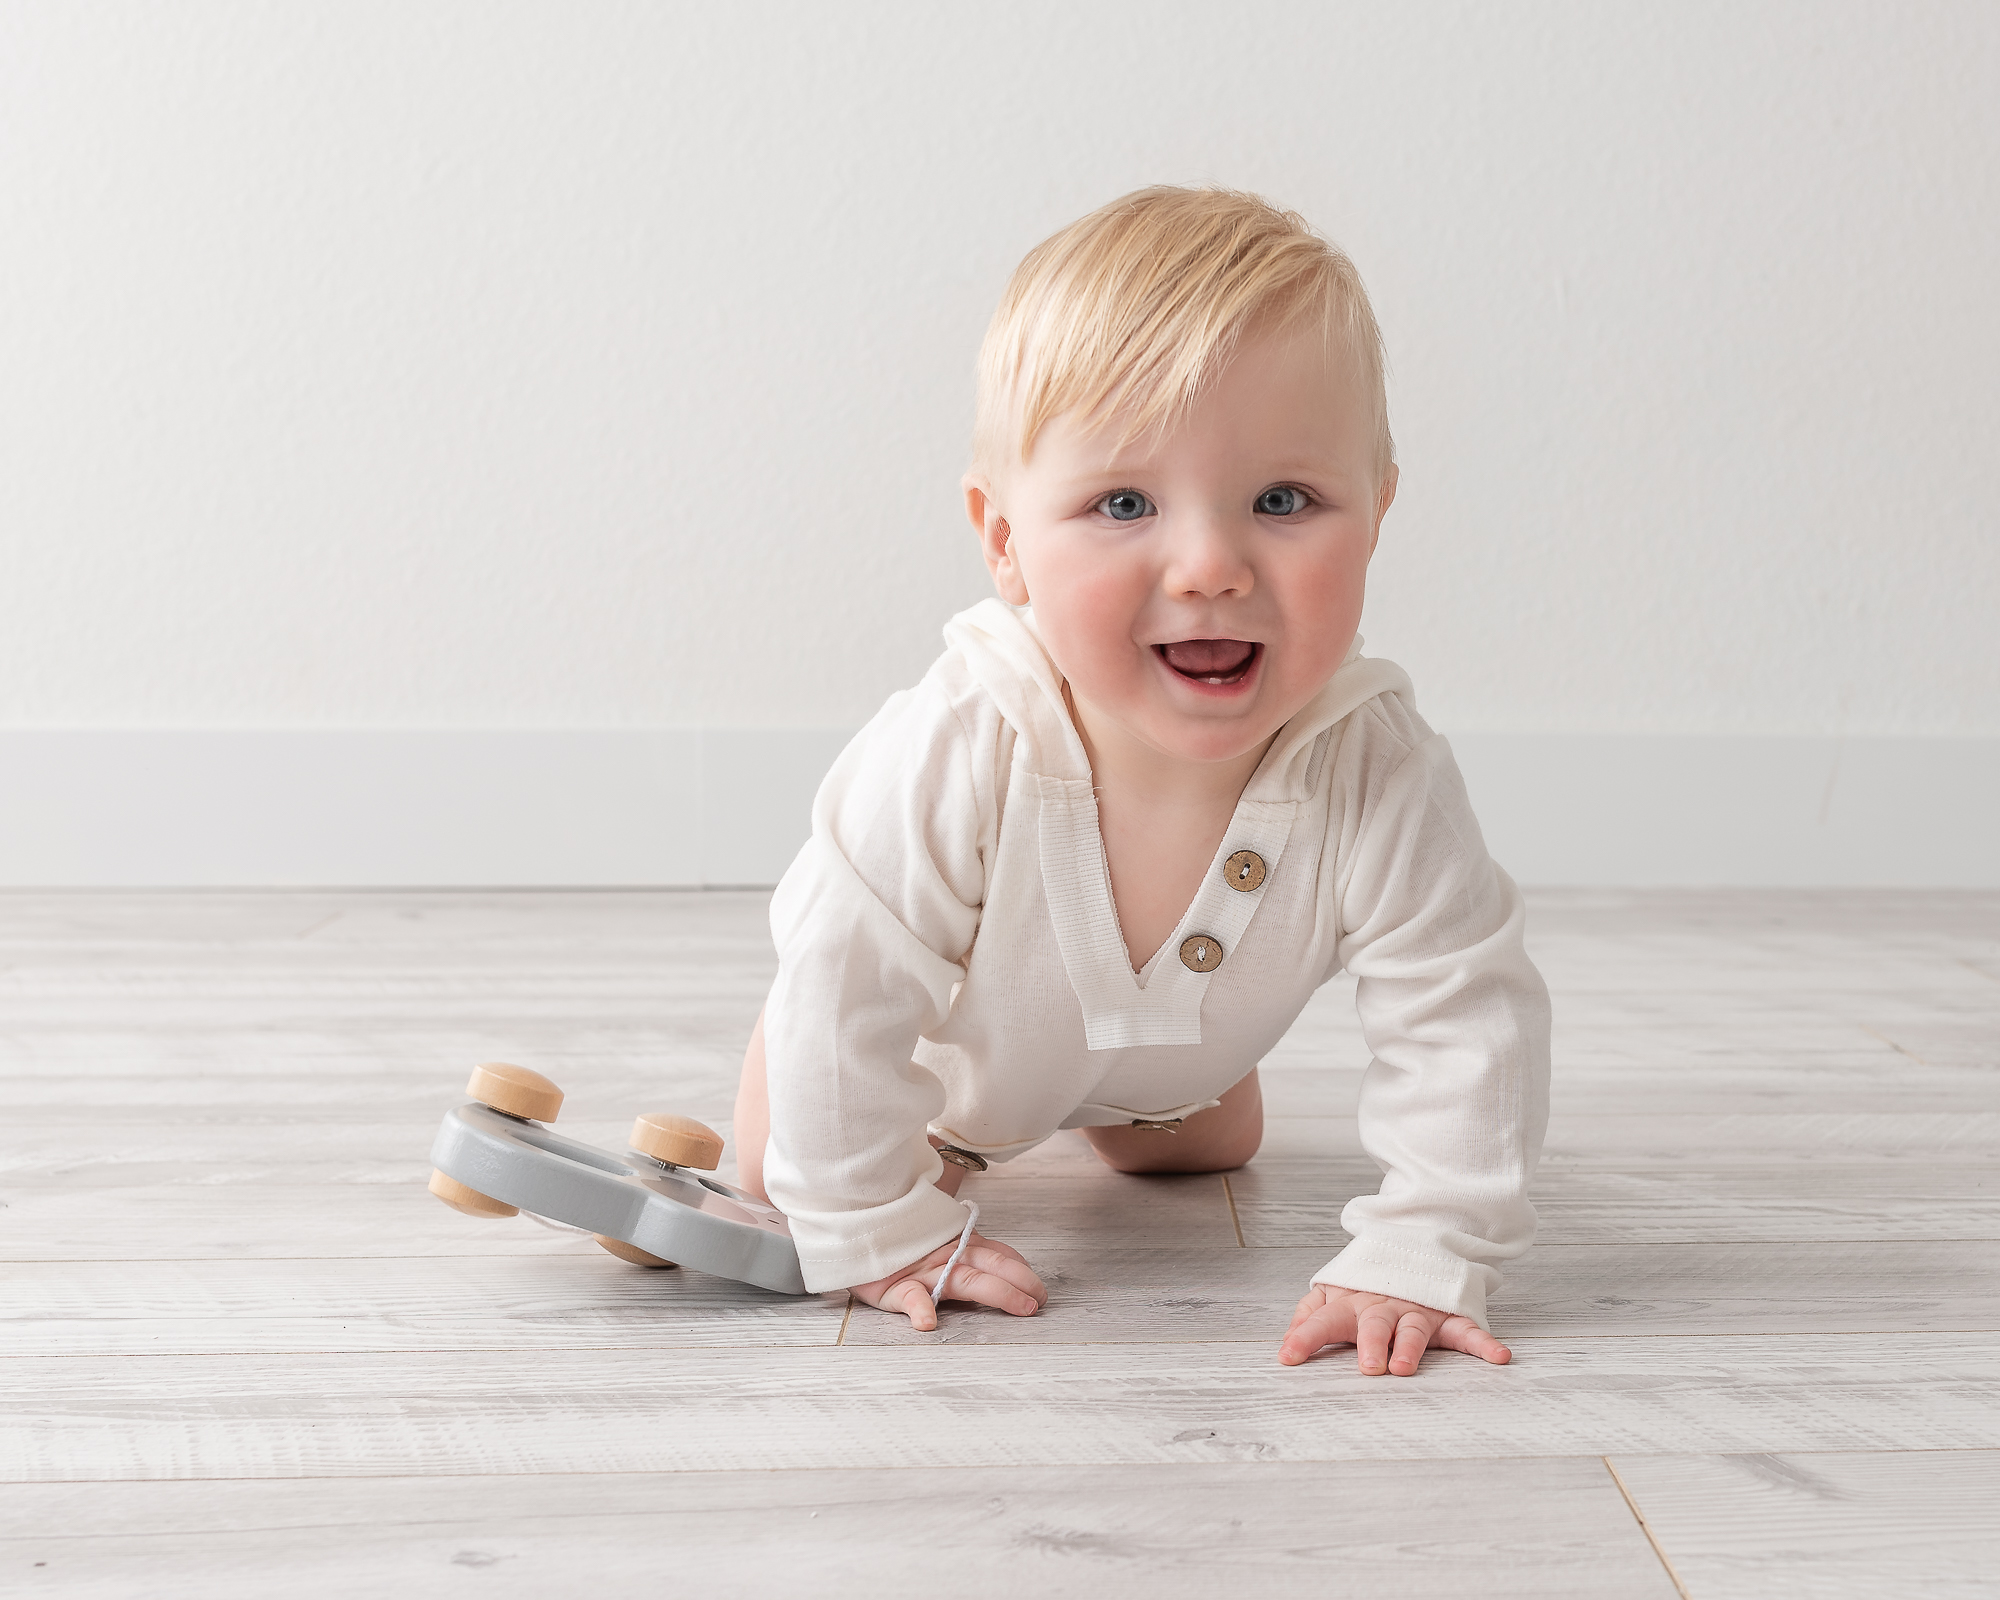 baby crawling on a floor in a studio